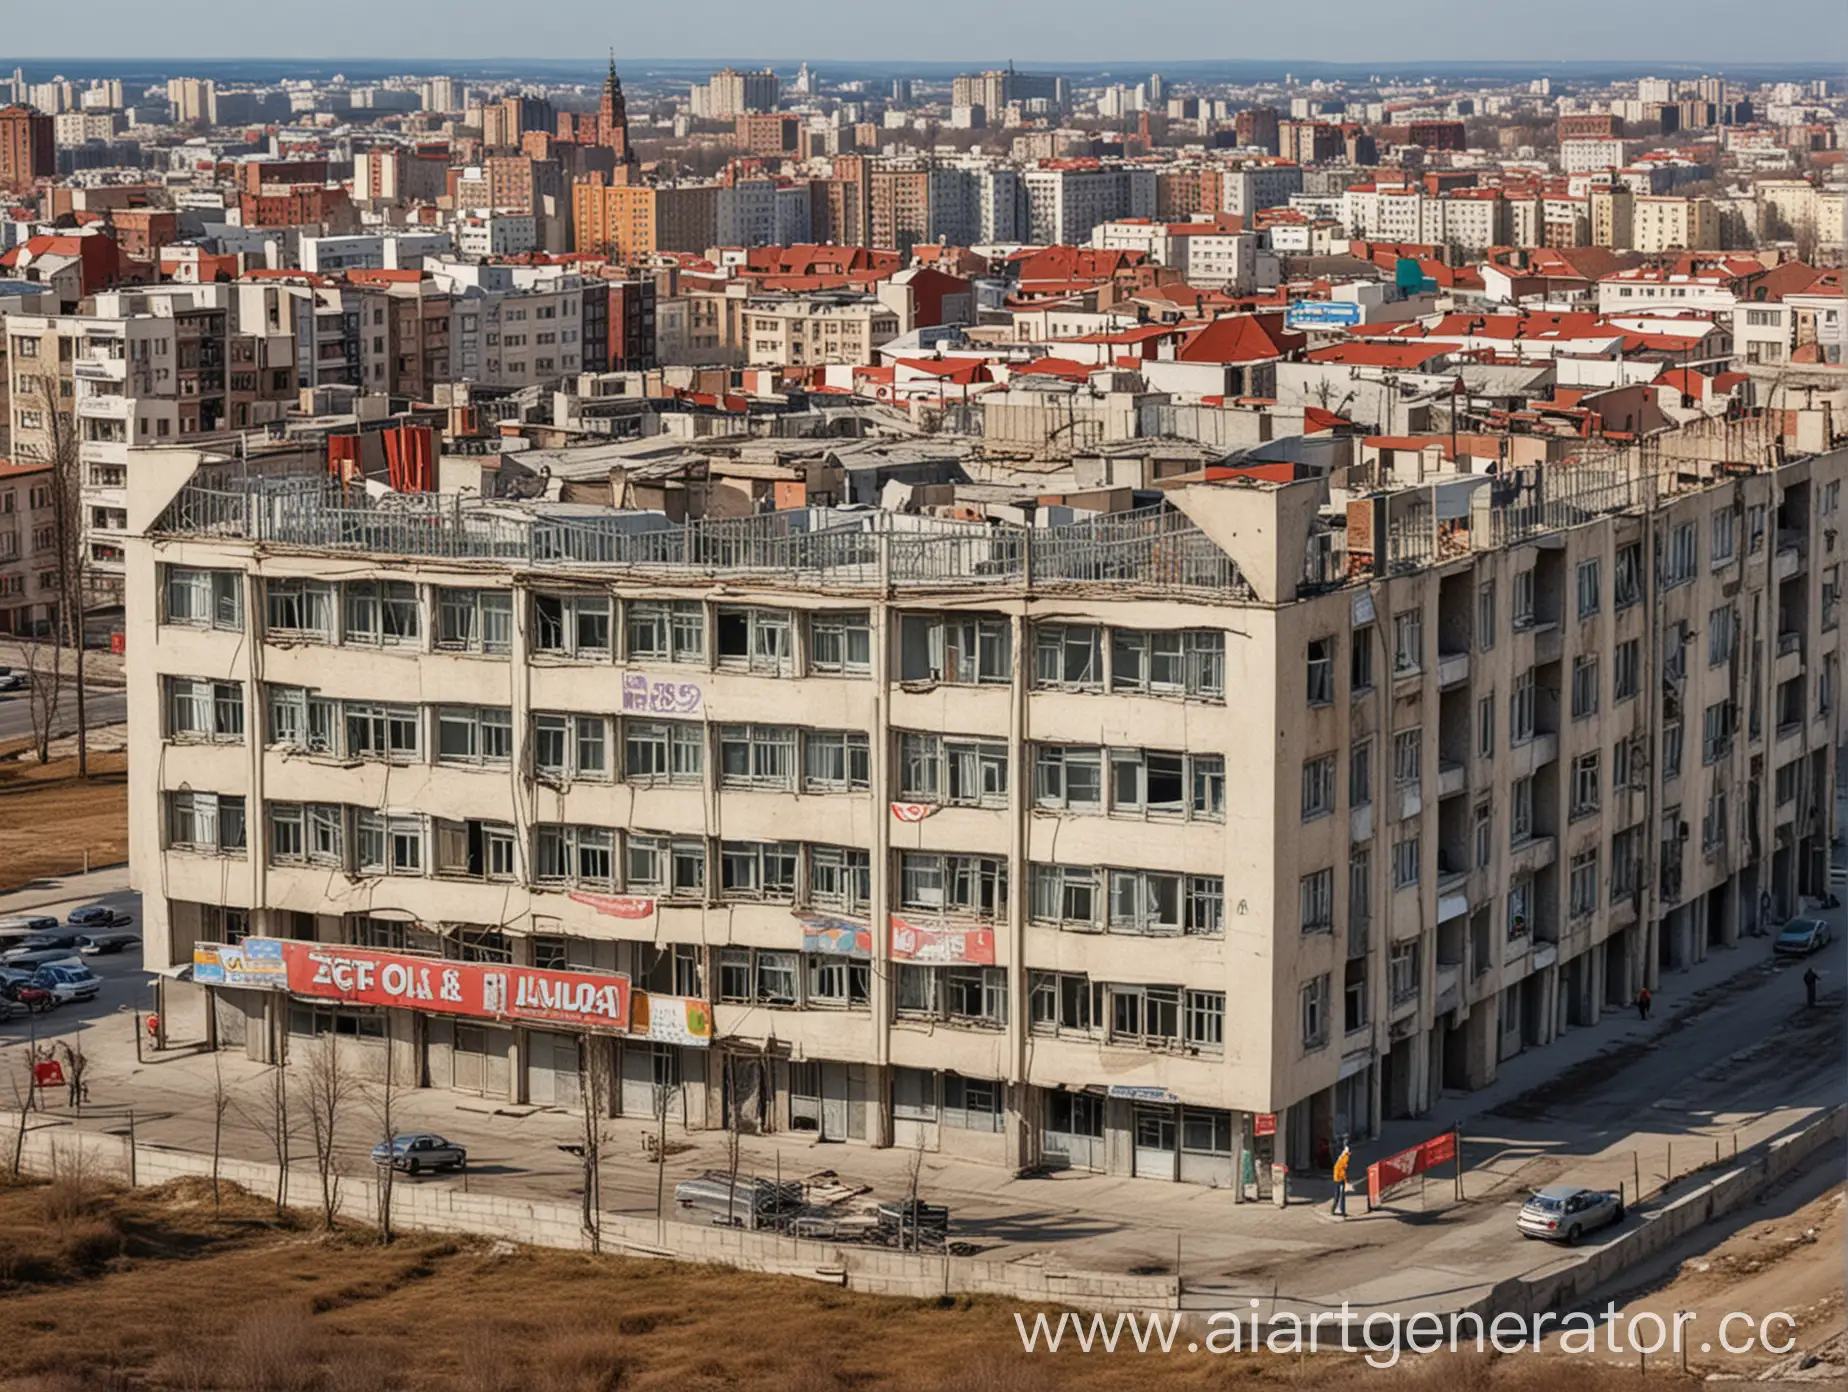 New-Buildings-in-Tula-Modern-Architectural-Designs-in-Urban-Setting